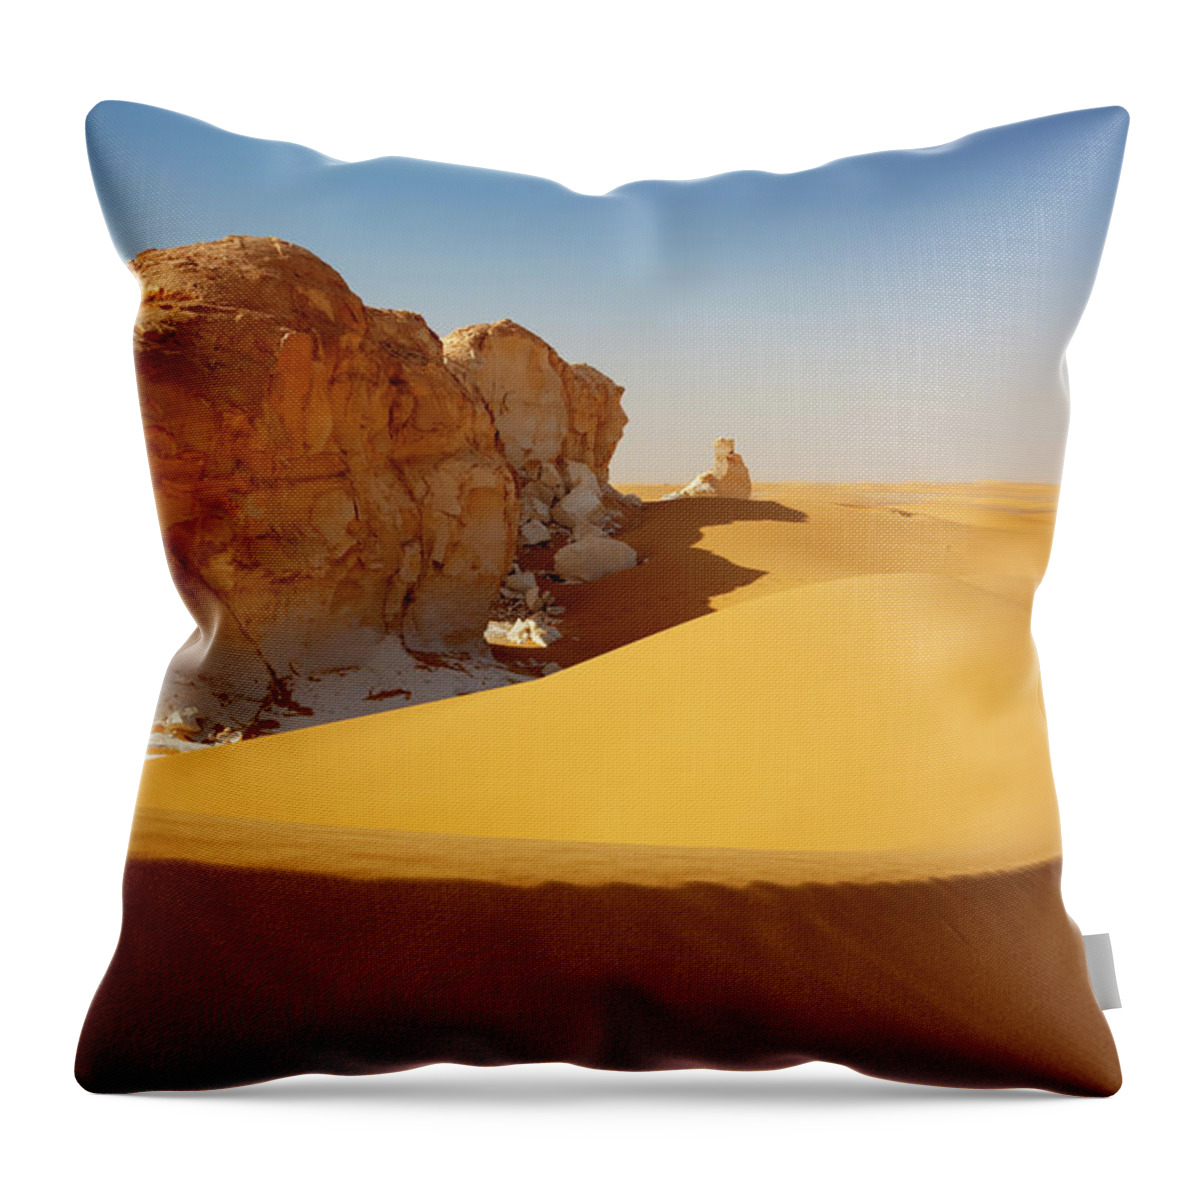 Scenics Throw Pillow featuring the photograph Sahara Landscape by Lucynakoch